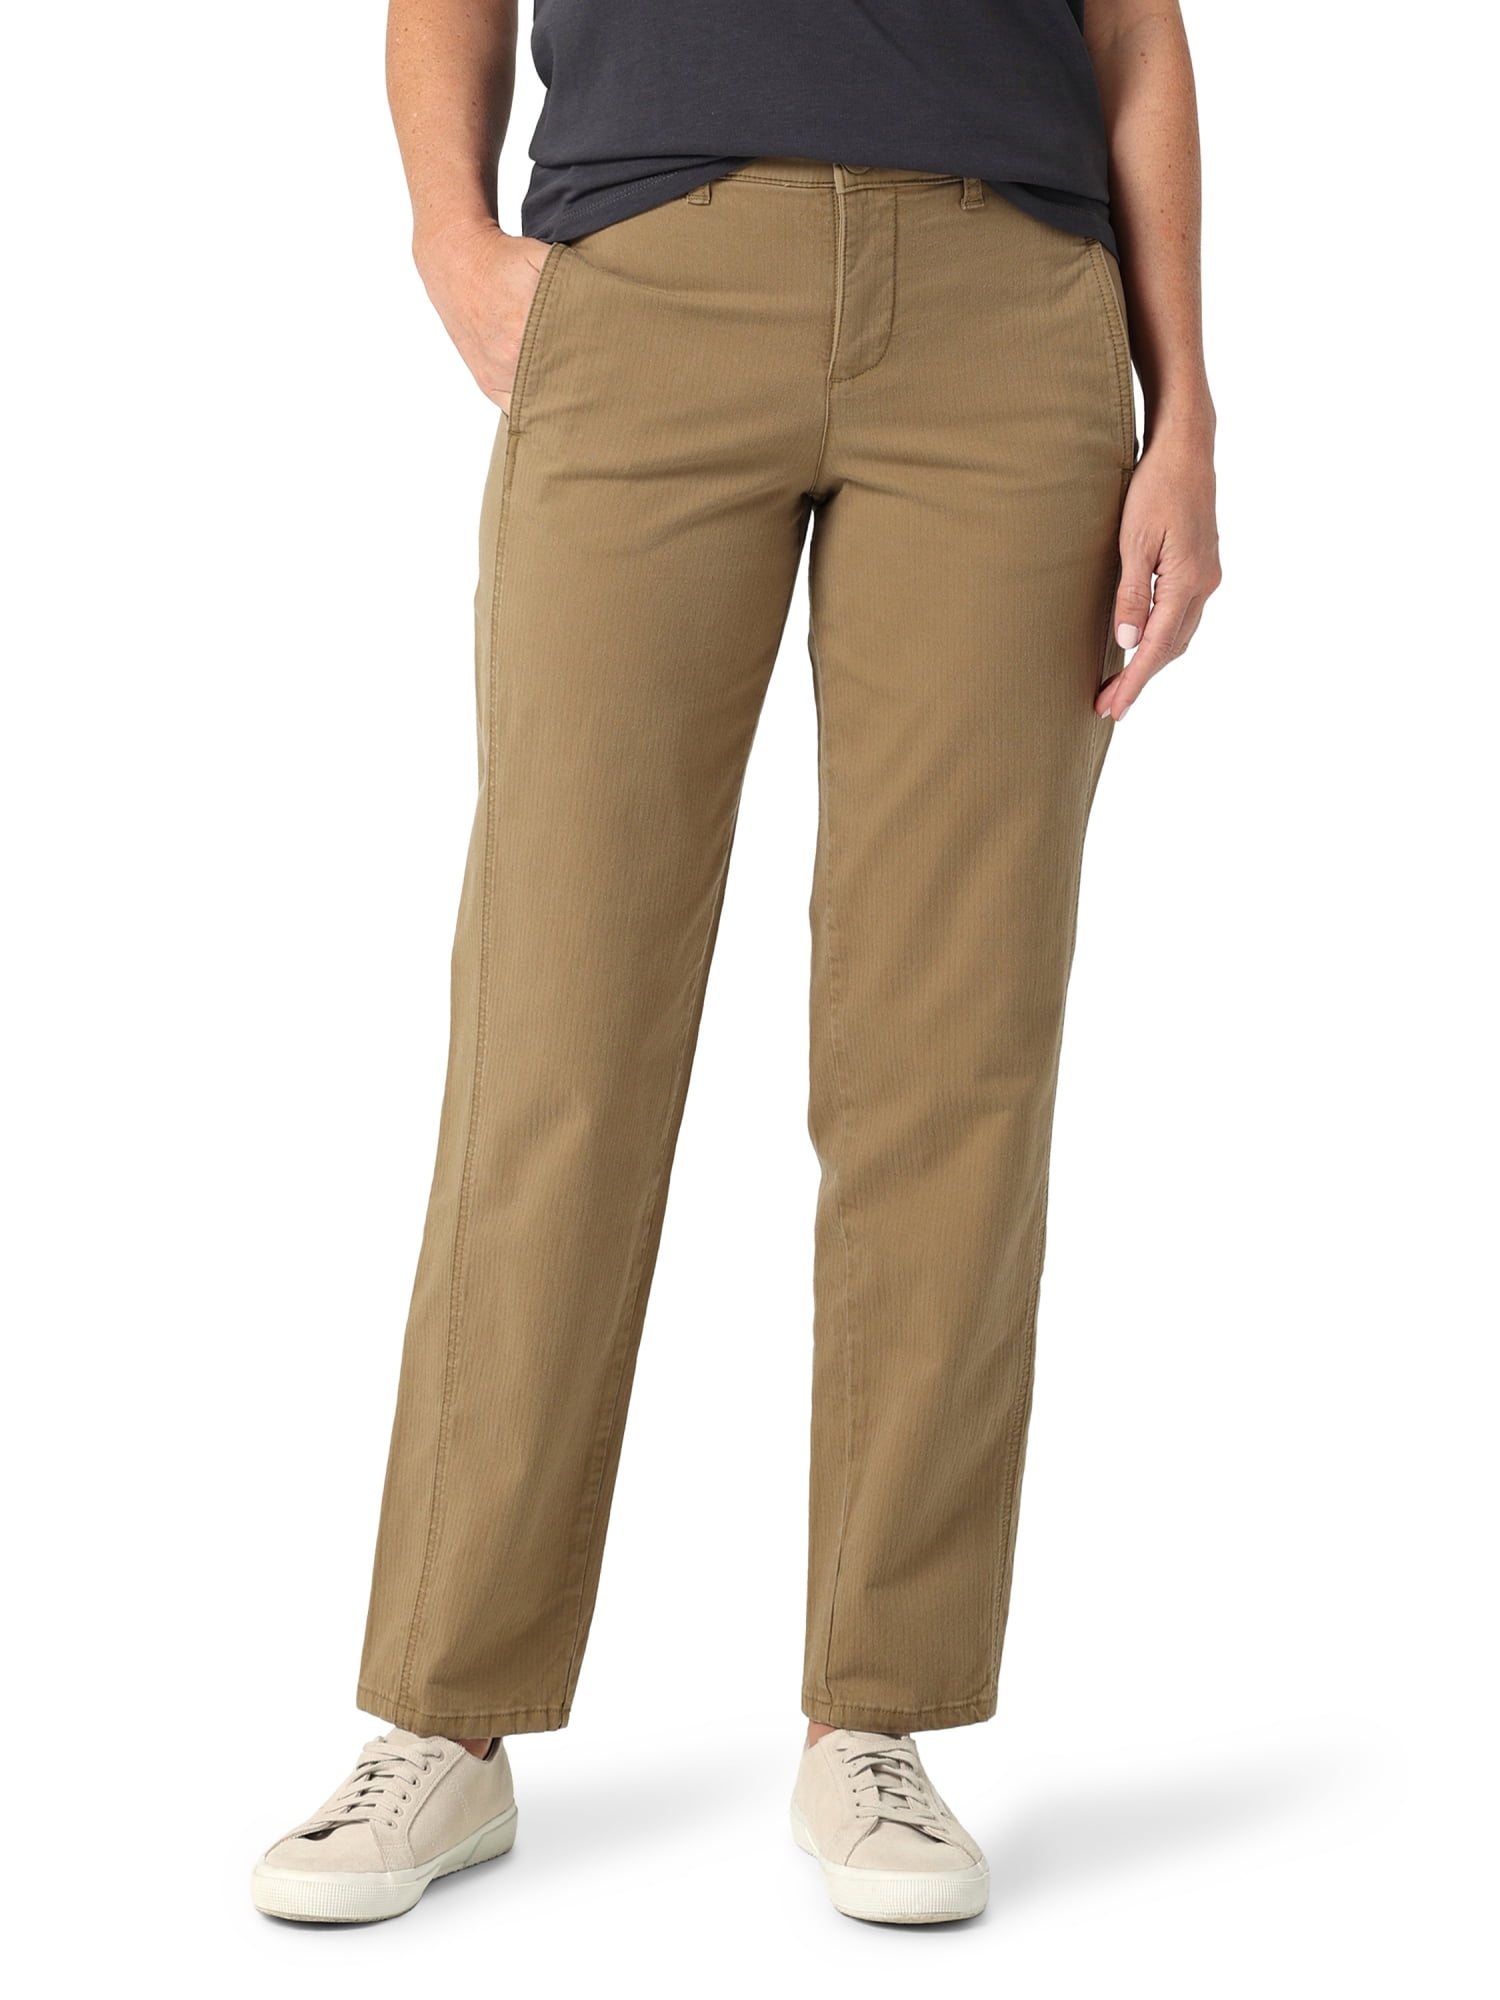 Lee® Women's Ultra Lux Relaxed Fit Straight Leg Pant - Walmart.com